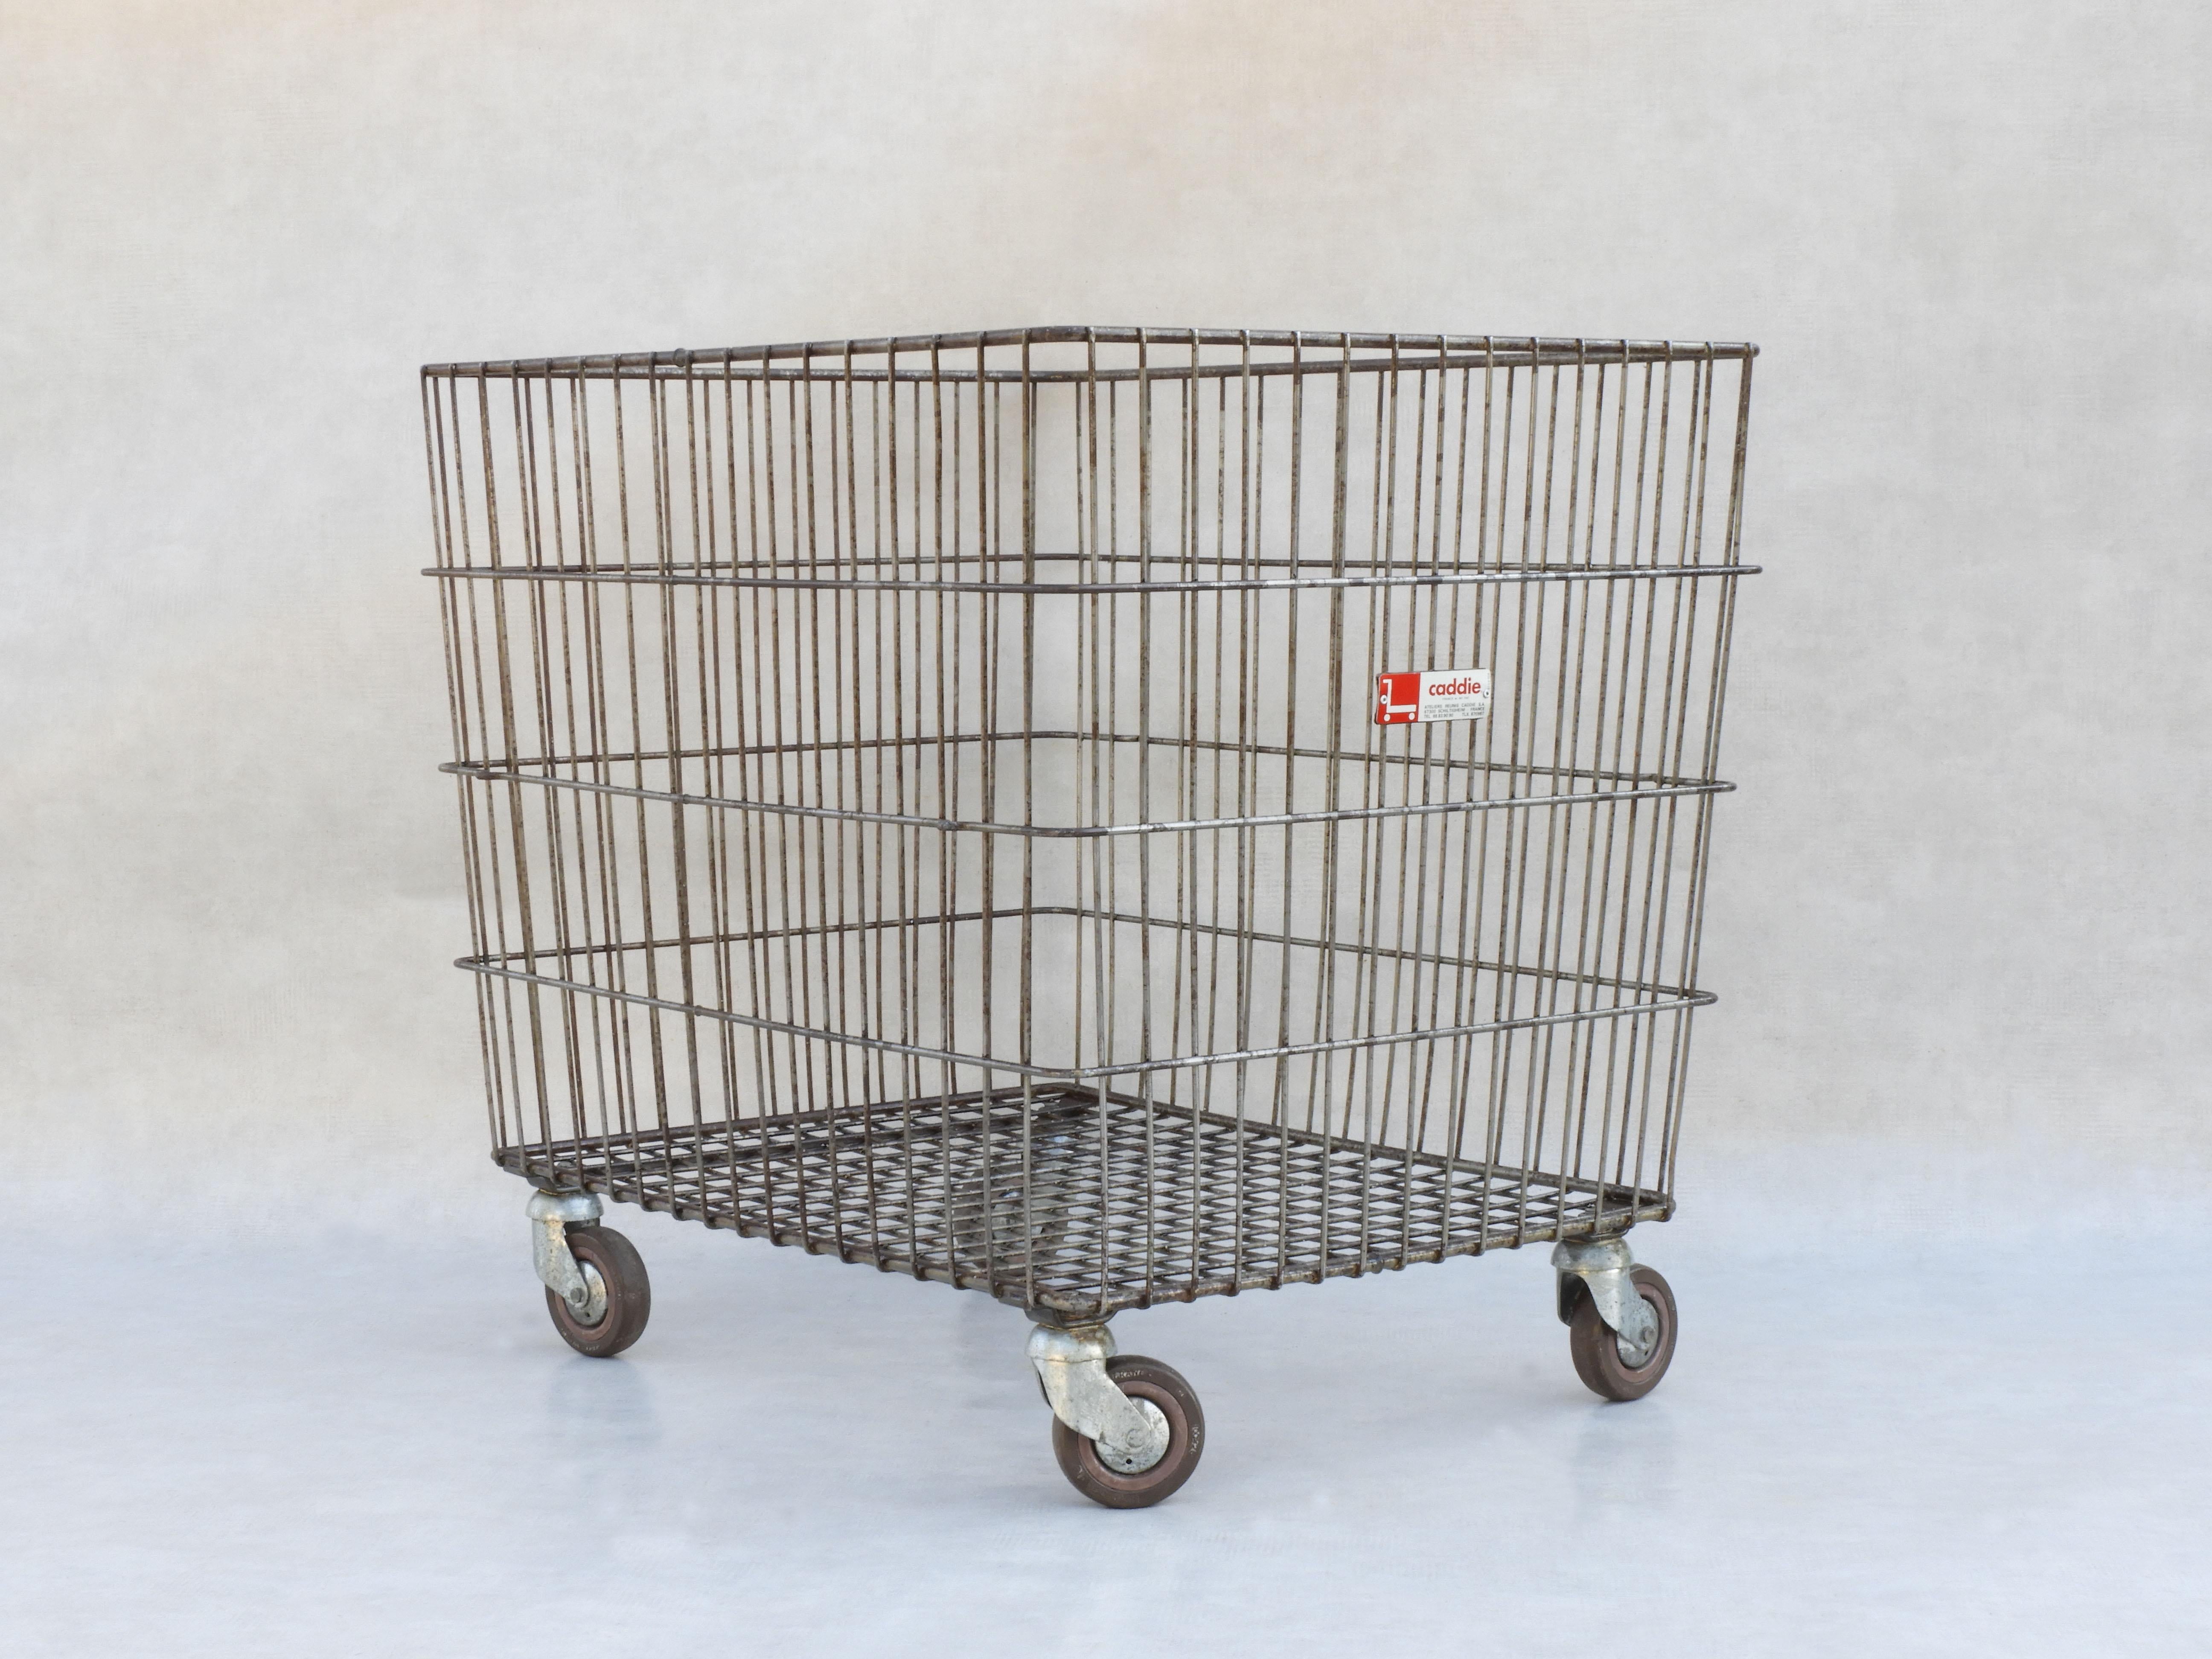 20th Century French Industrial Trolley Basket Cart C1970